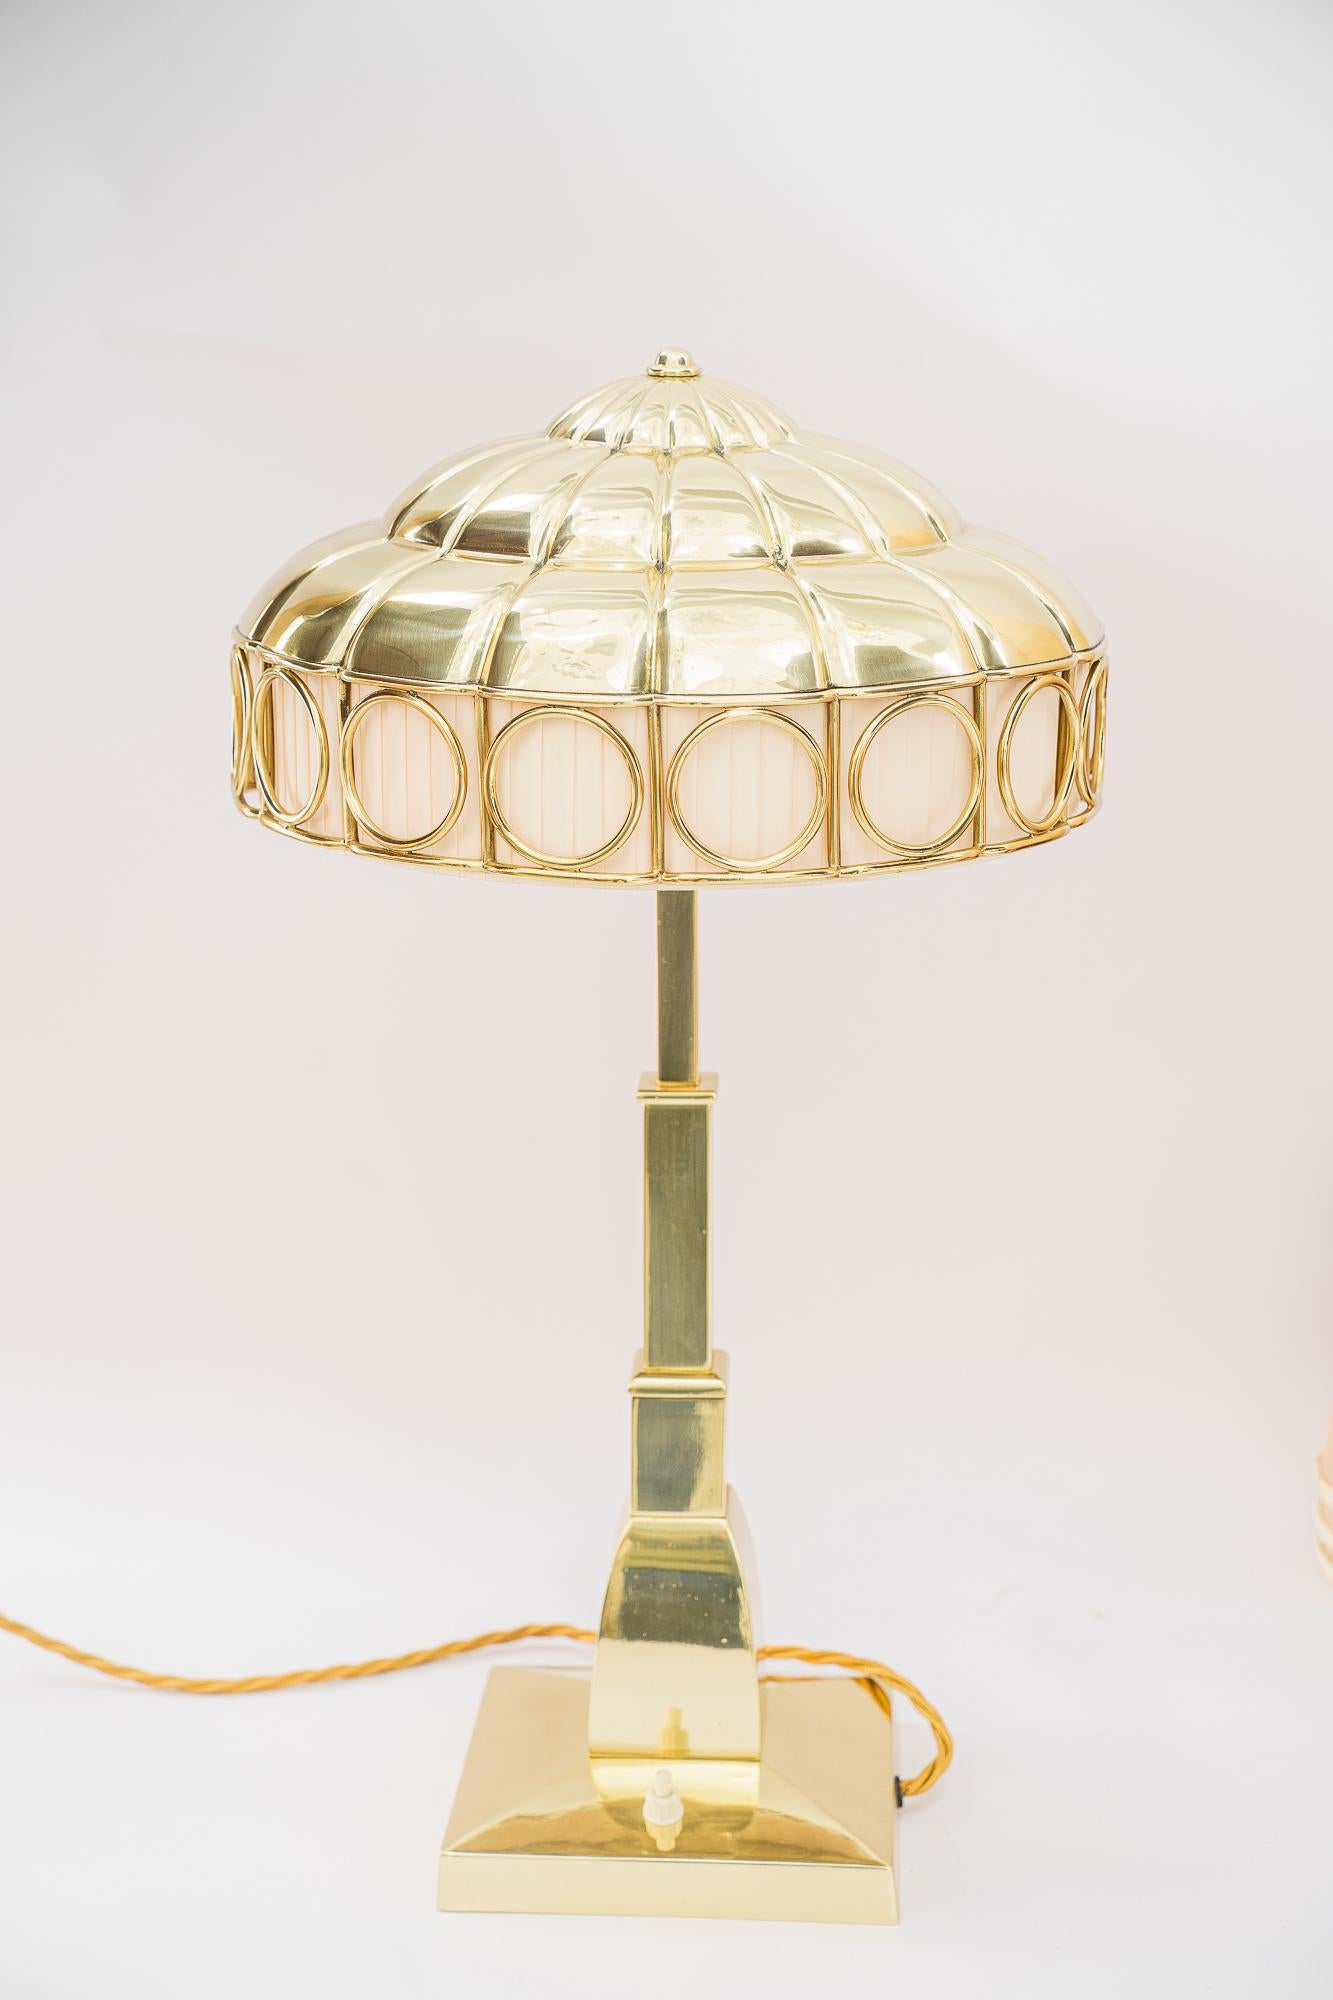 Art Deco table lamp with fabric inside the shade vienna around 1920s
The fabric inside the shade is replaced ( new )
Brass polished and stove enameled
